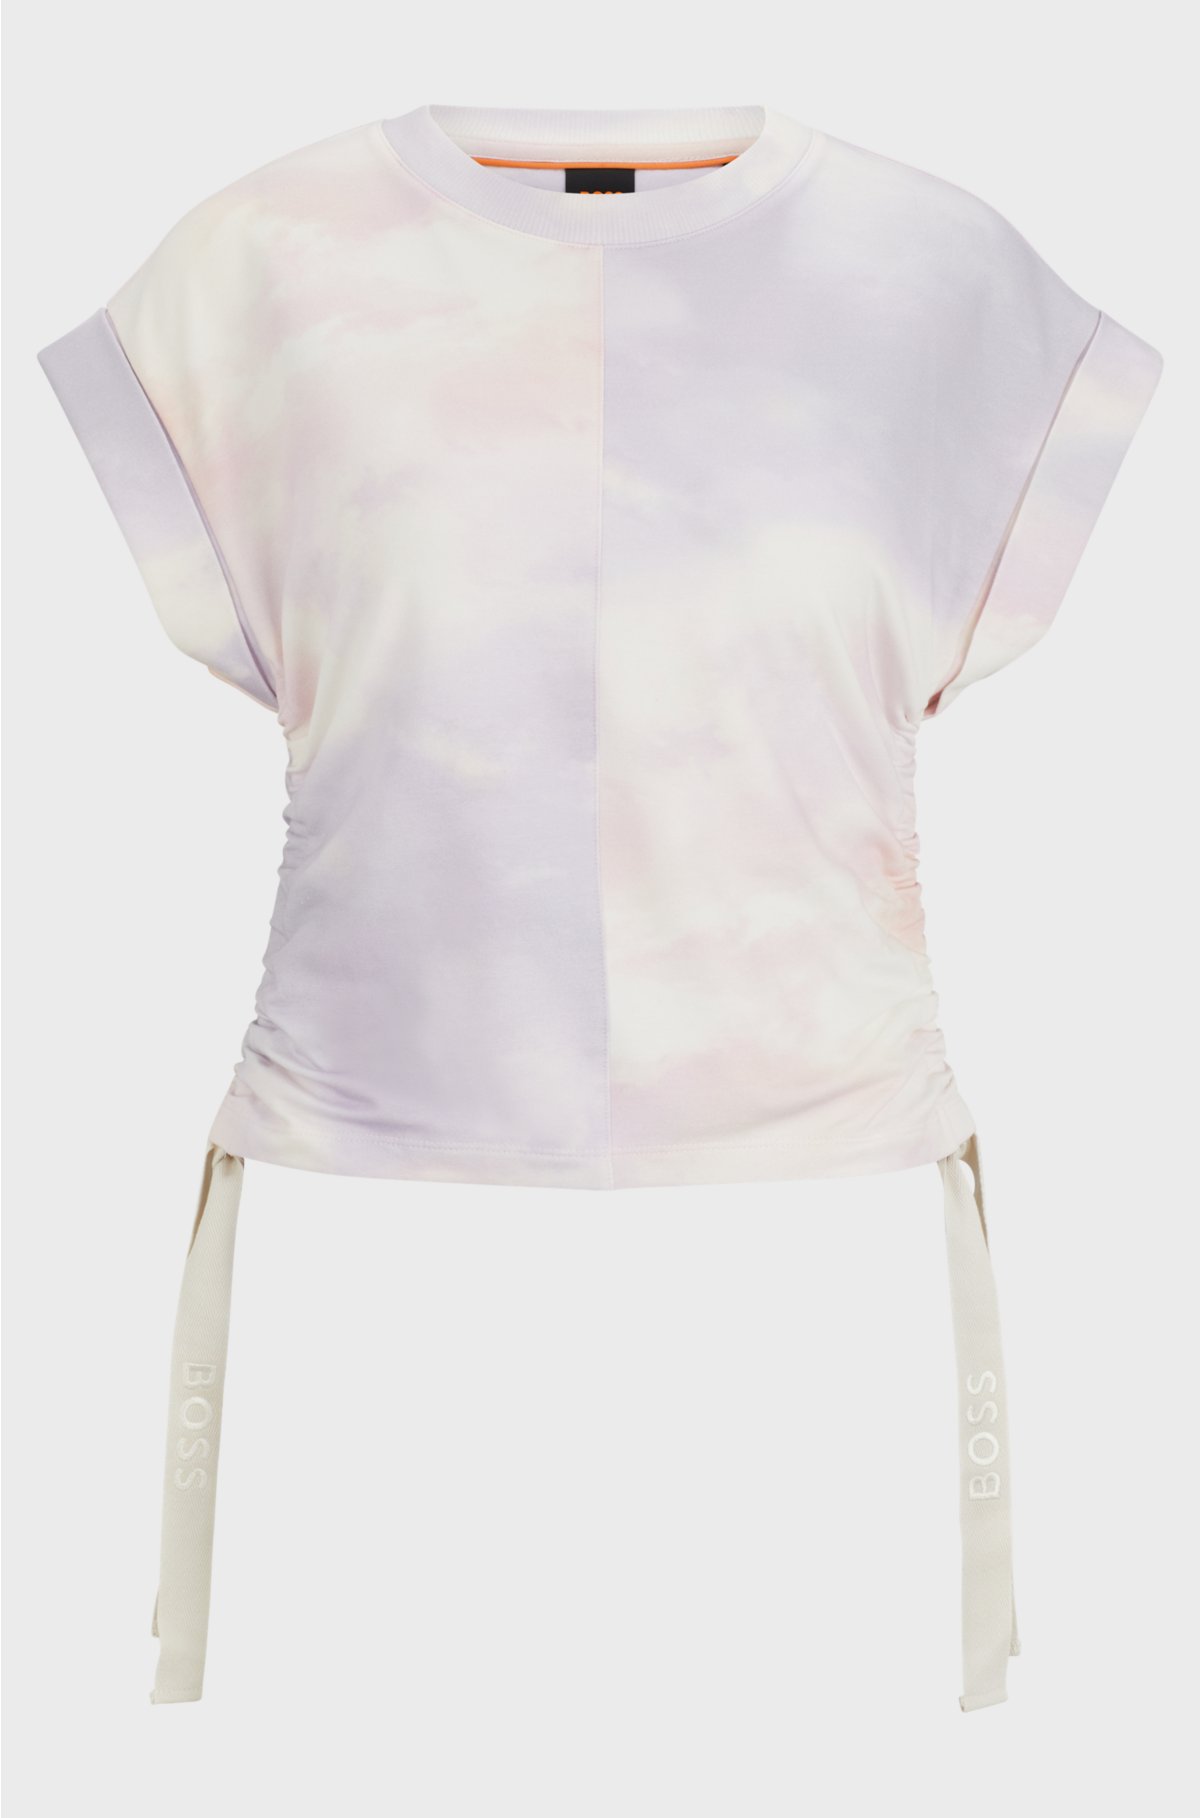 Patterned T-shirt in stretch cotton with branded drawcords, Pink Patterned